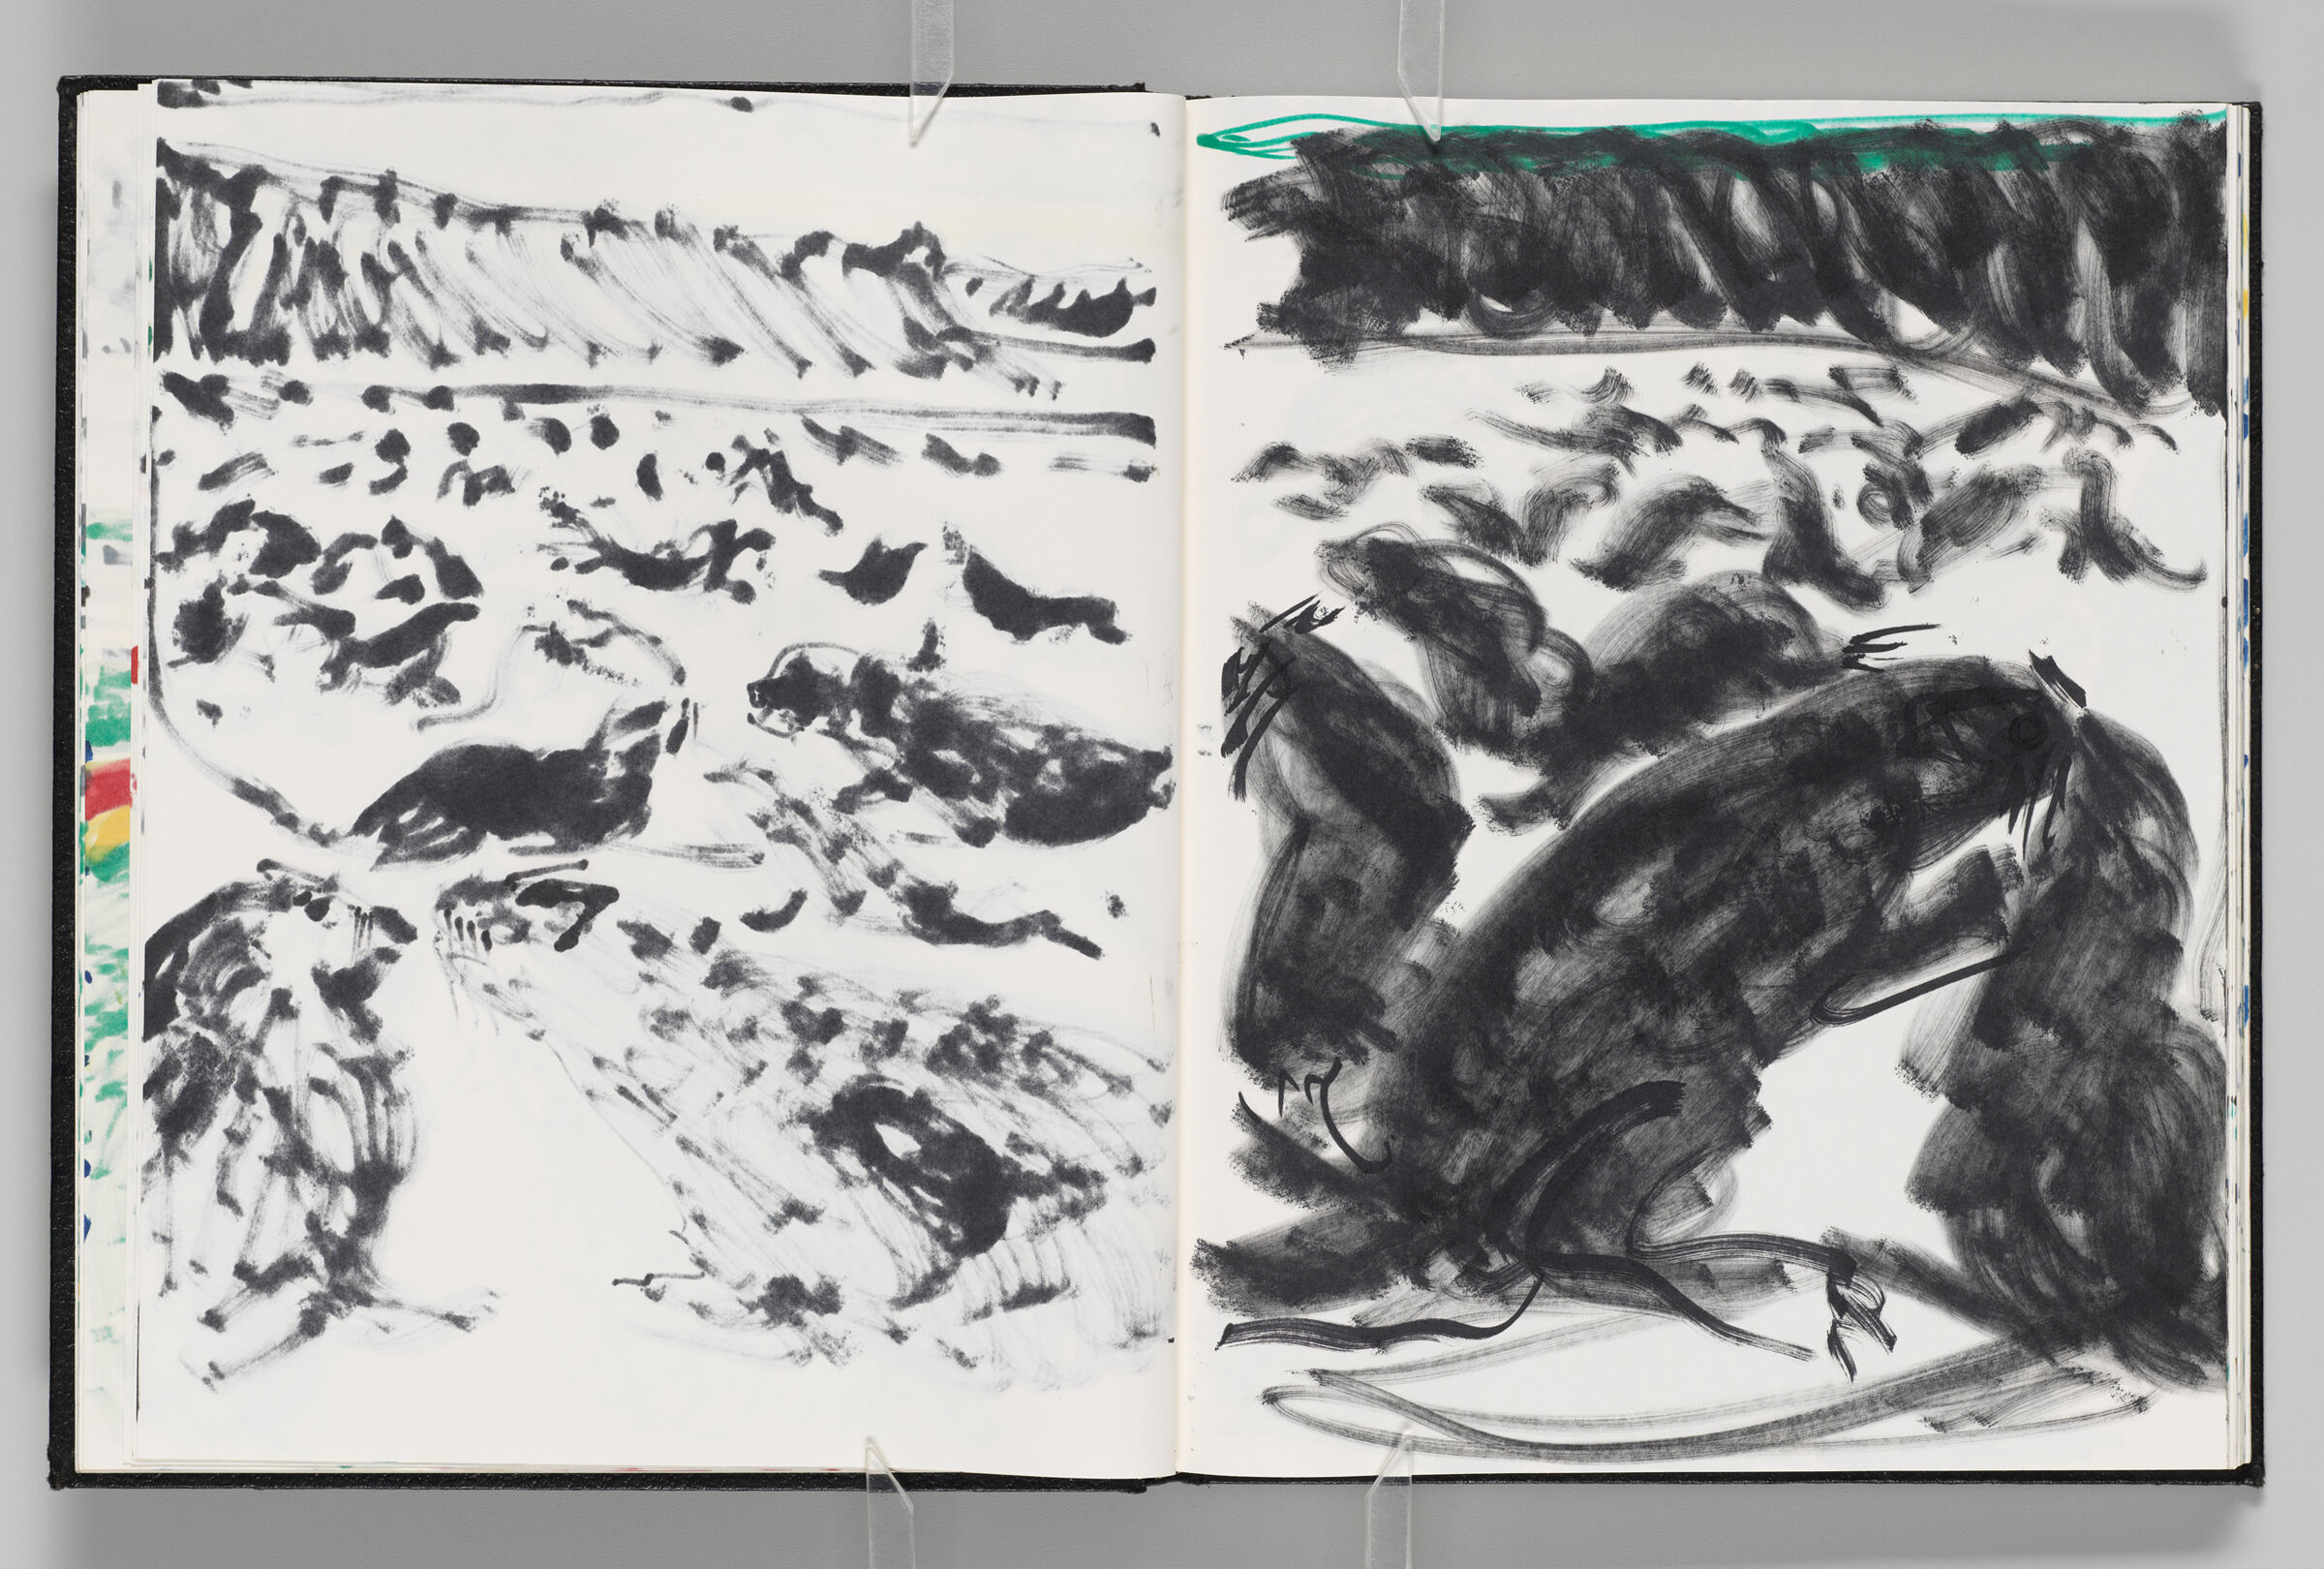 Untitled (Bleed-Through Of Previous Page, Left Page); Untitled (Seals In Landscape, Right Page)